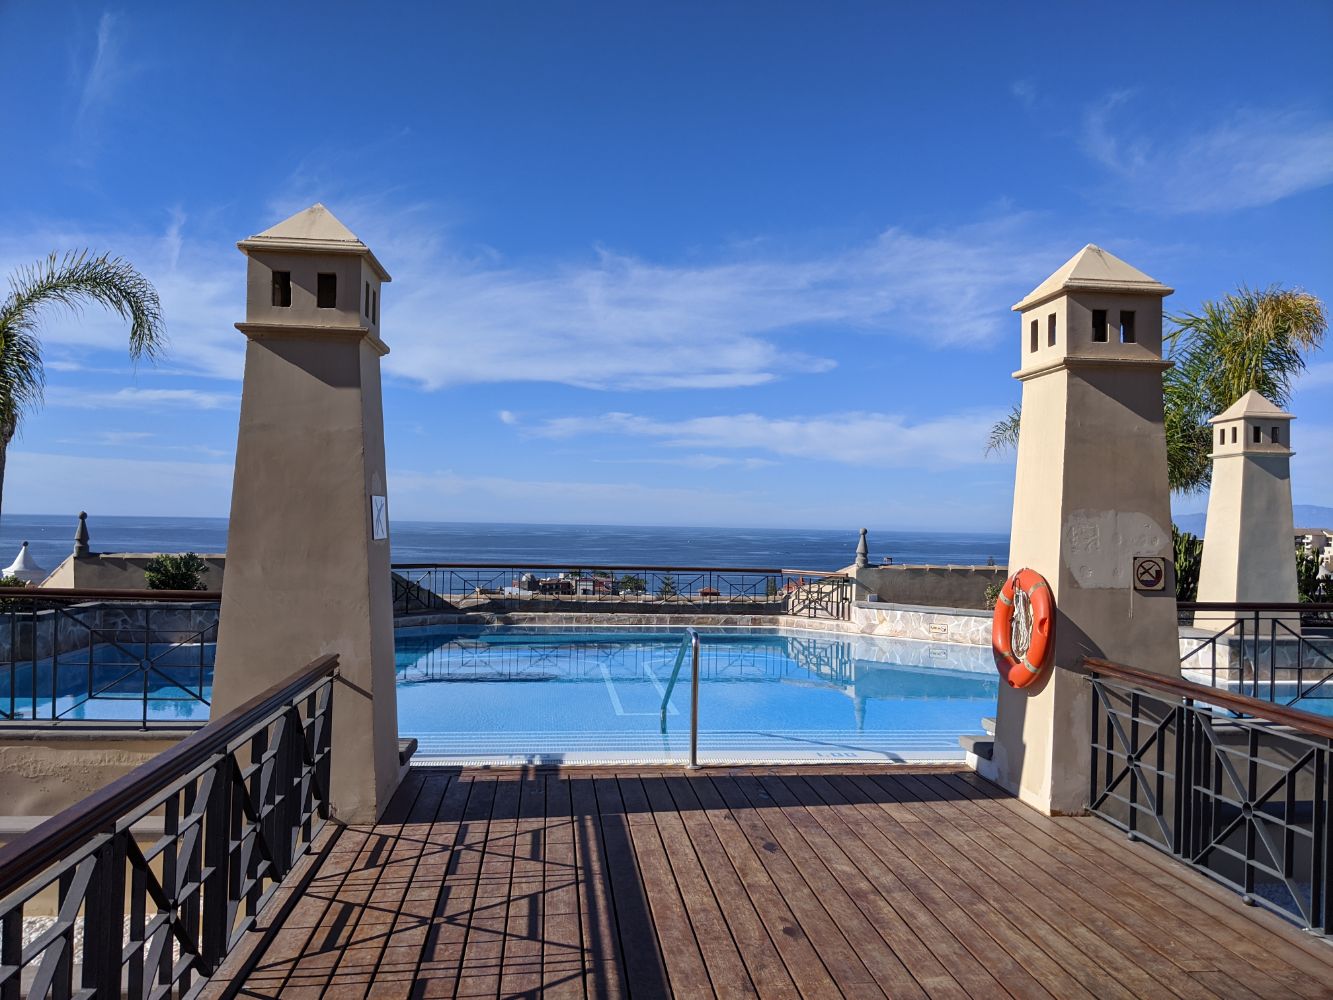 A pool on the roof, with a view out to sea and a blue sky, with some small clouds